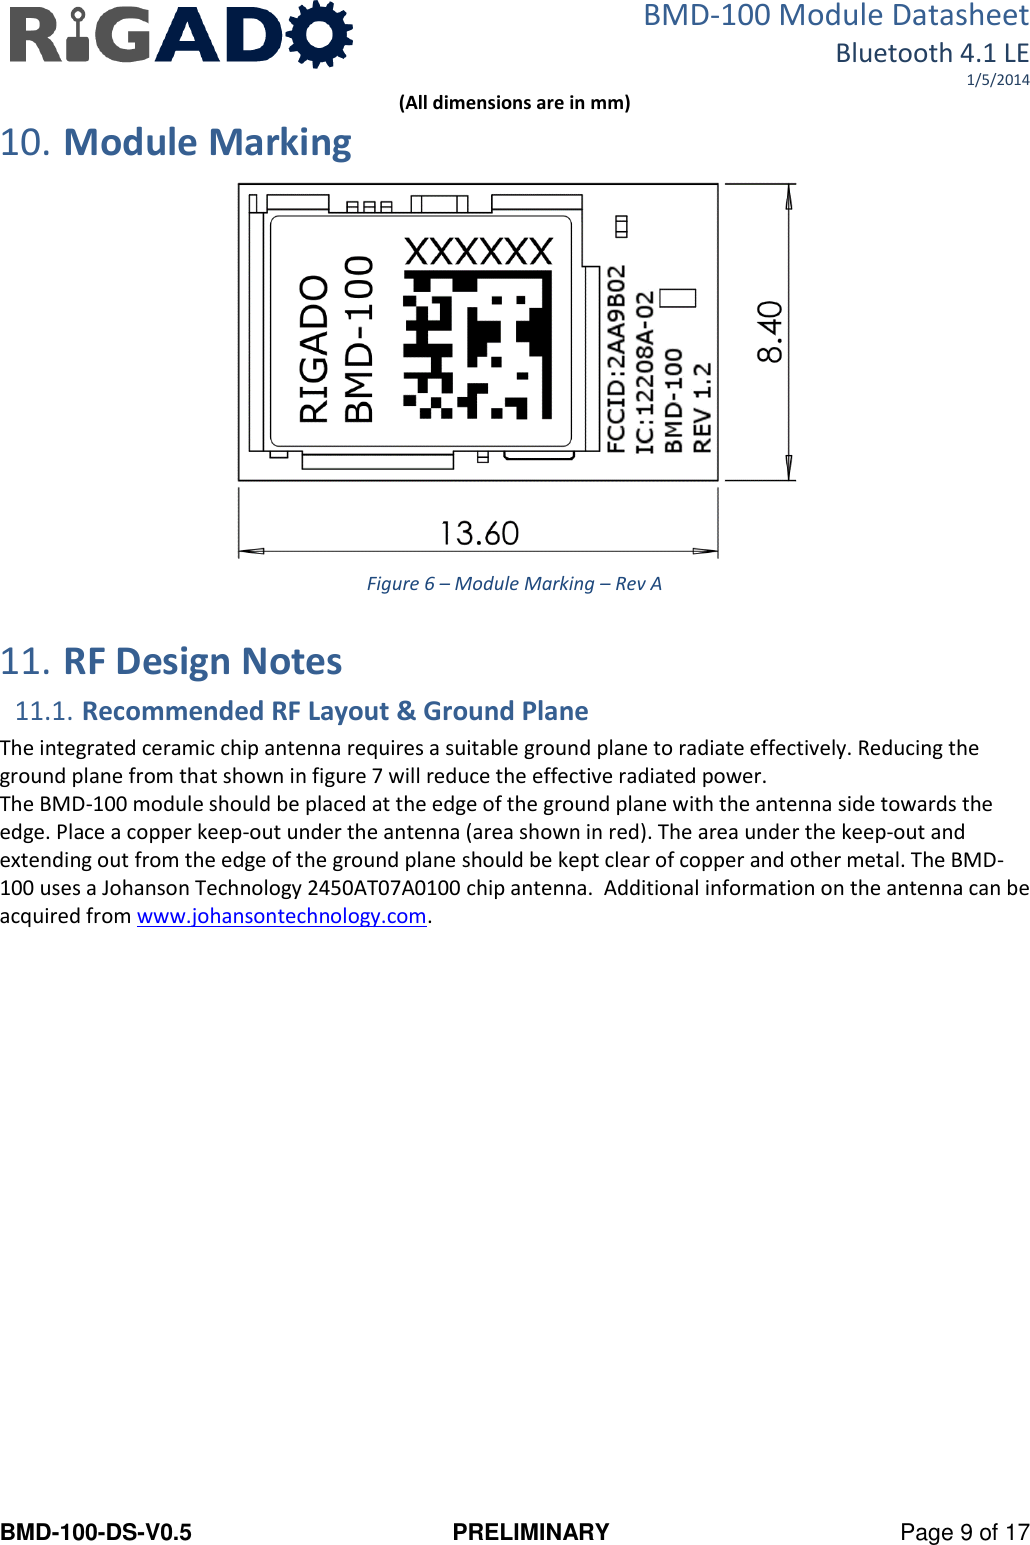 BMD-100 Module Datasheet Bluetooth 4.1 LE 1/5/2014 BMD-100-DS-V0.5  PRELIMINARY  Page 9 of 17 (All dimensions are in mm) 10. Module Marking  Figure 6 – Module Marking – Rev A  11. RF Design Notes 11.1. Recommended RF Layout &amp; Ground Plane The integrated ceramic chip antenna requires a suitable ground plane to radiate effectively. Reducing the ground plane from that shown in figure 7 will reduce the effective radiated power. The BMD-100 module should be placed at the edge of the ground plane with the antenna side towards the edge. Place a copper keep-out under the antenna (area shown in red). The area under the keep-out and extending out from the edge of the ground plane should be kept clear of copper and other metal. The BMD-100 uses a Johanson Technology 2450AT07A0100 chip antenna.  Additional information on the antenna can be acquired from www.johansontechnology.com.  